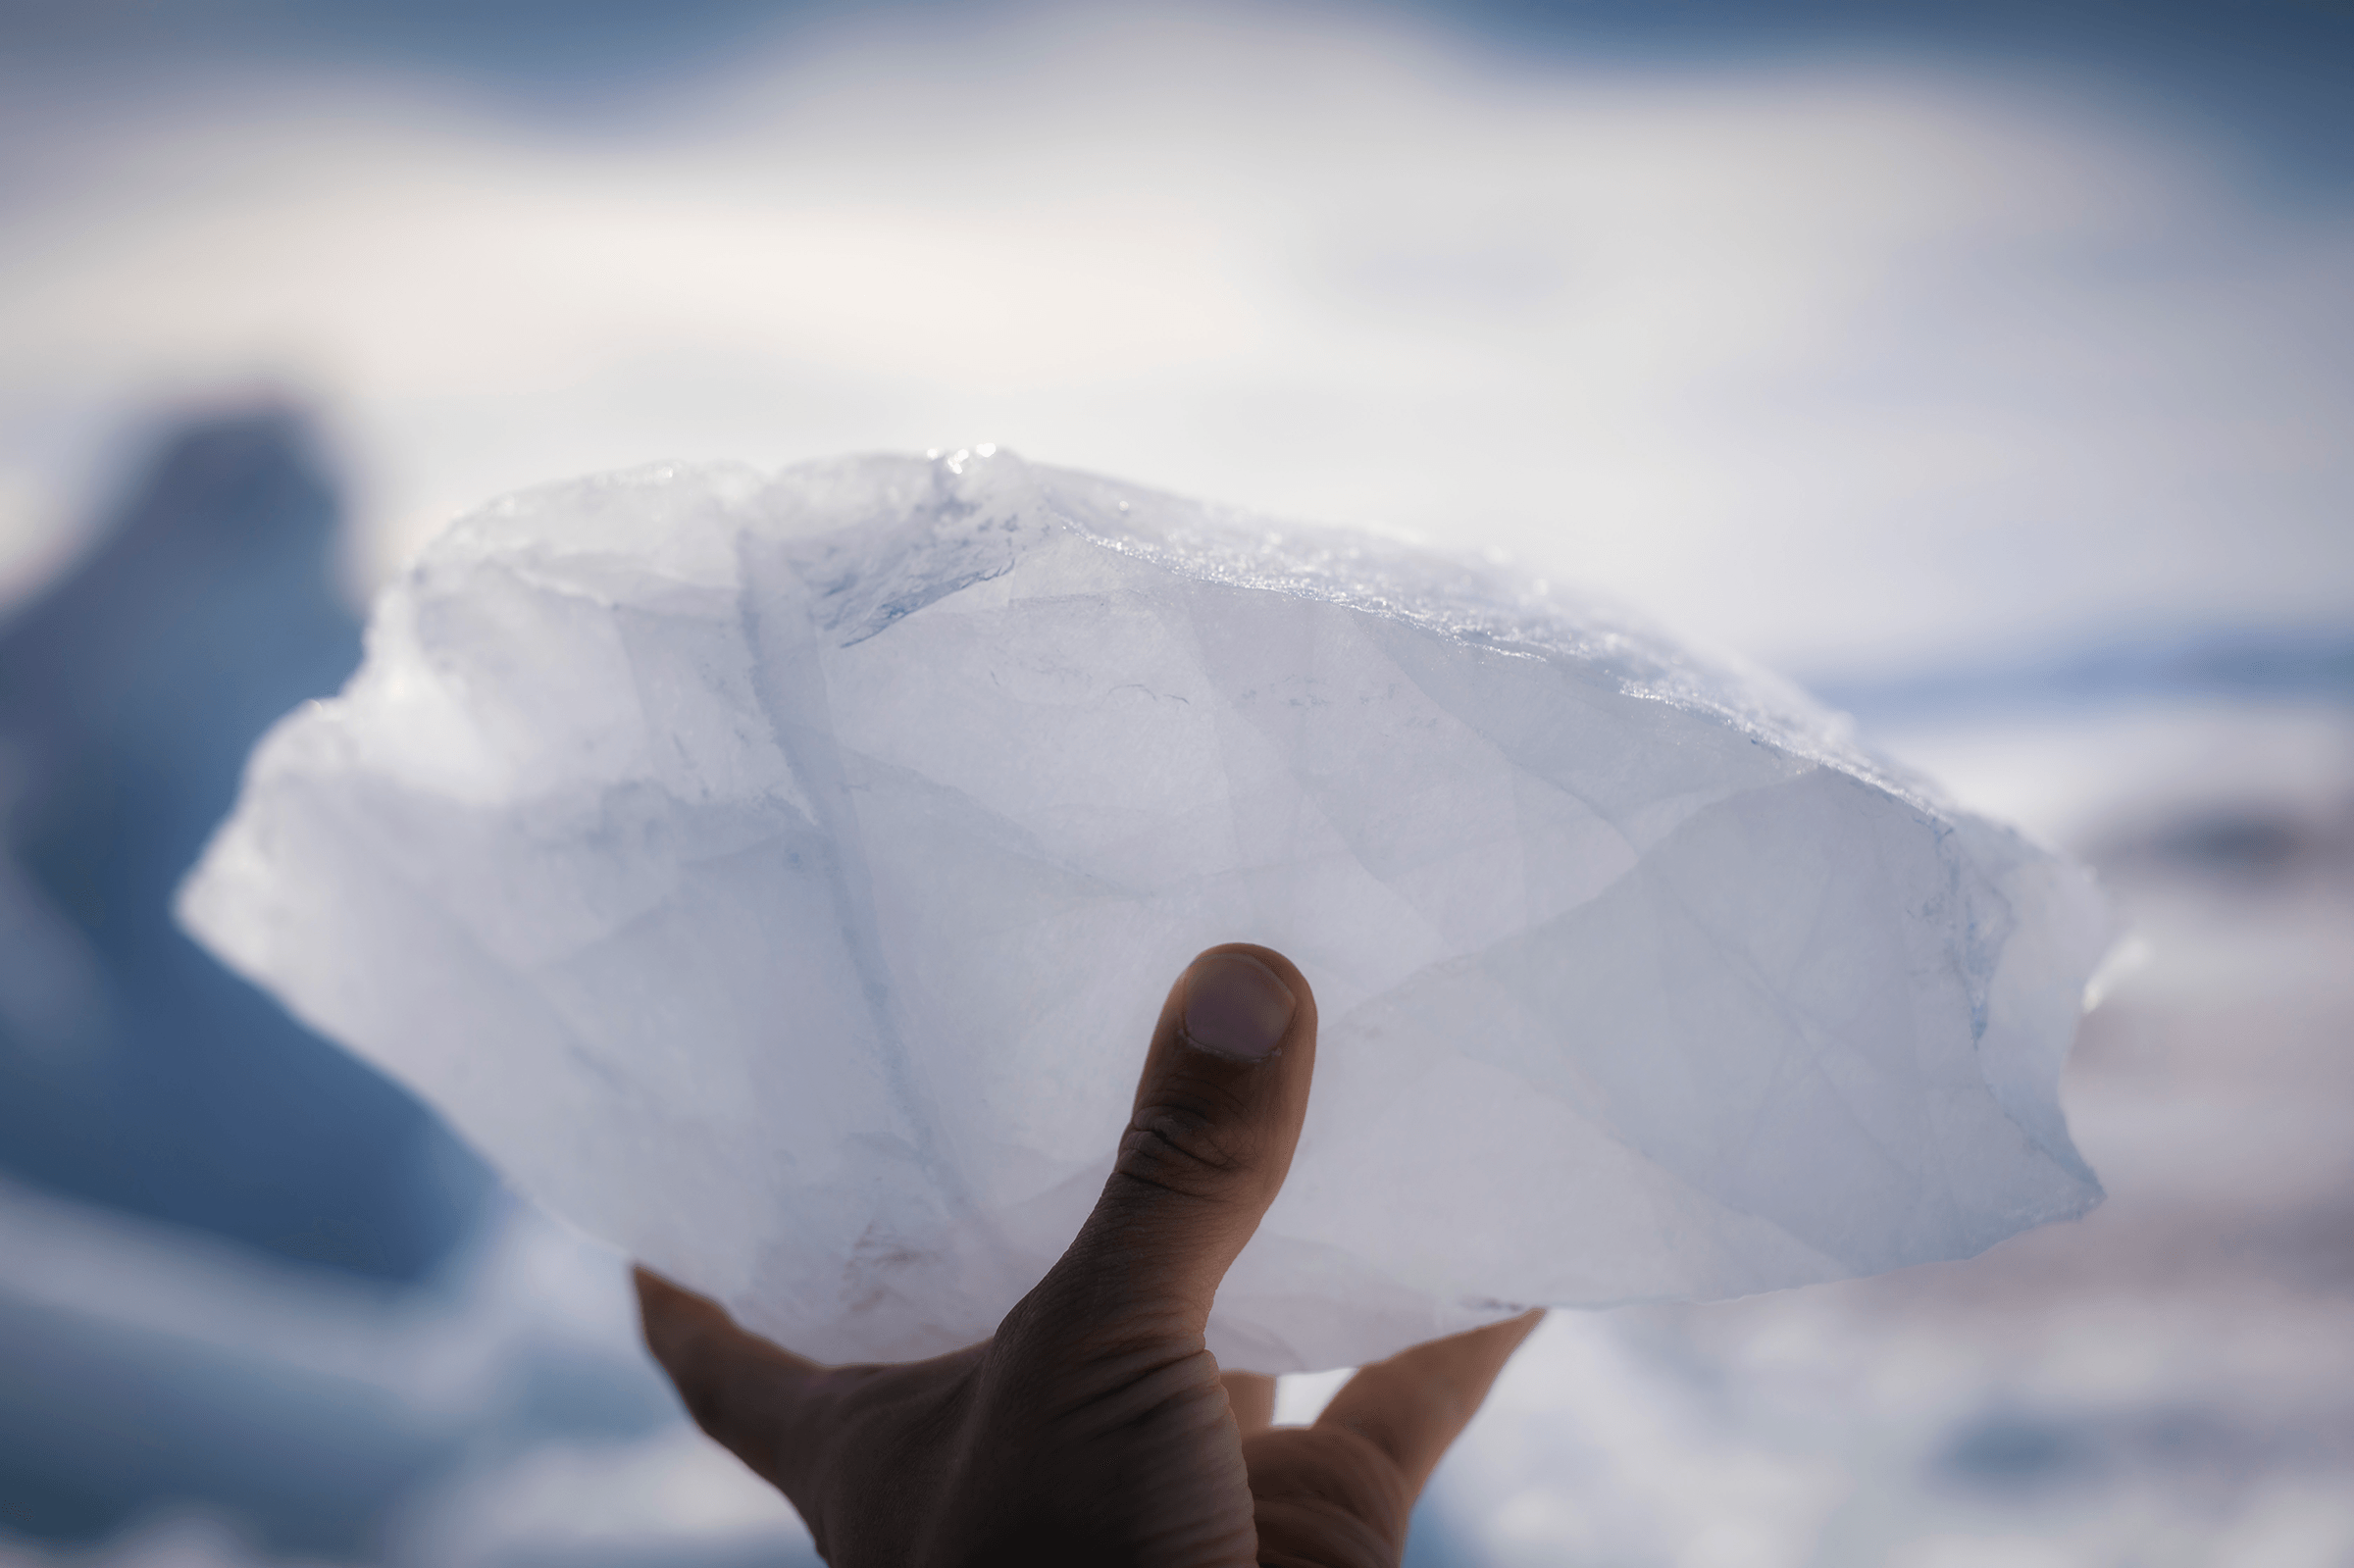 Chunk of ice in a hand. Photo by Aningaaq R Carlsen - Visit Greenland. png